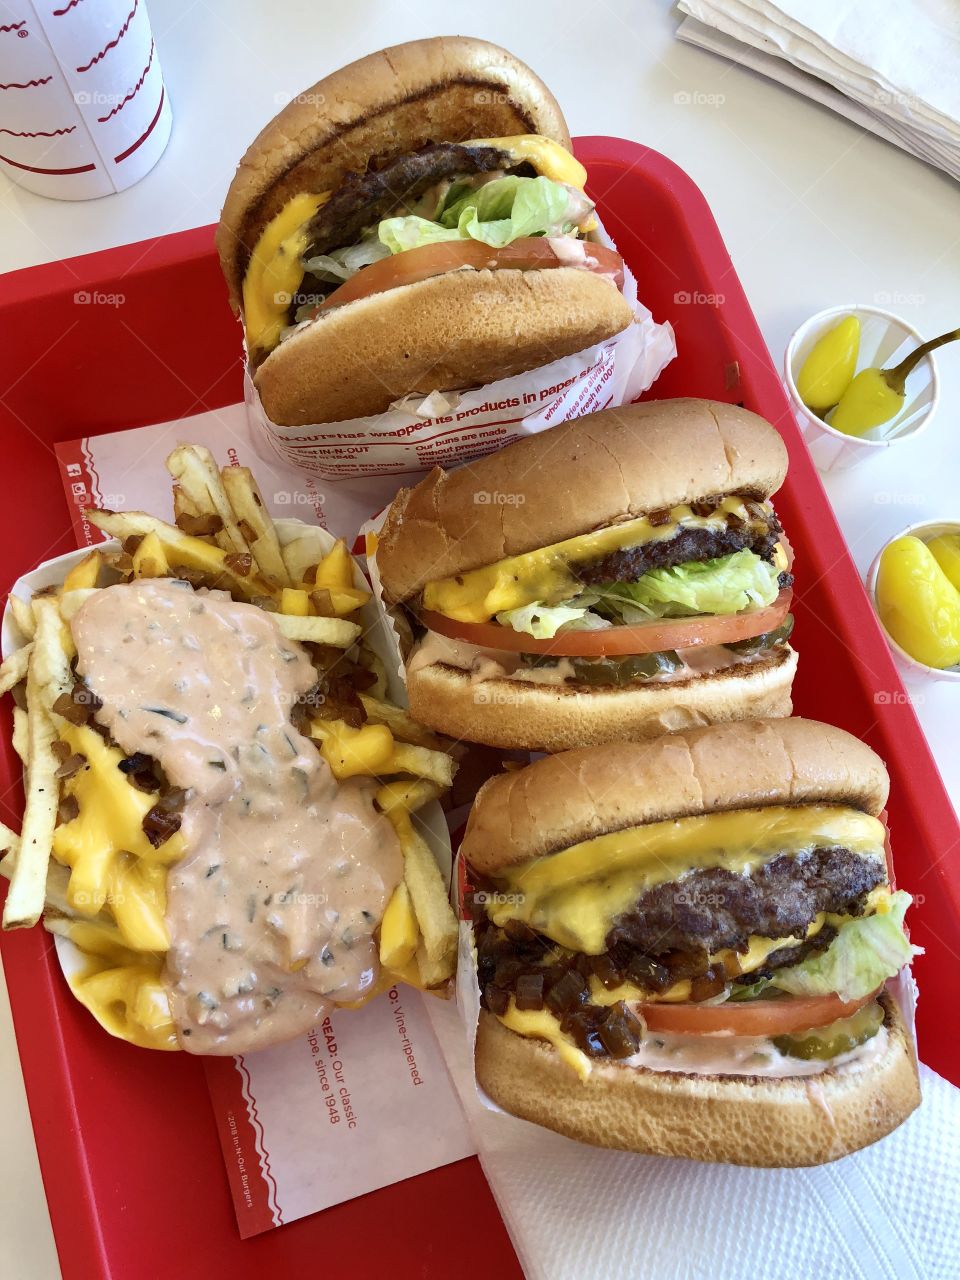 FIVE GUYS BURGERS AND FRIES